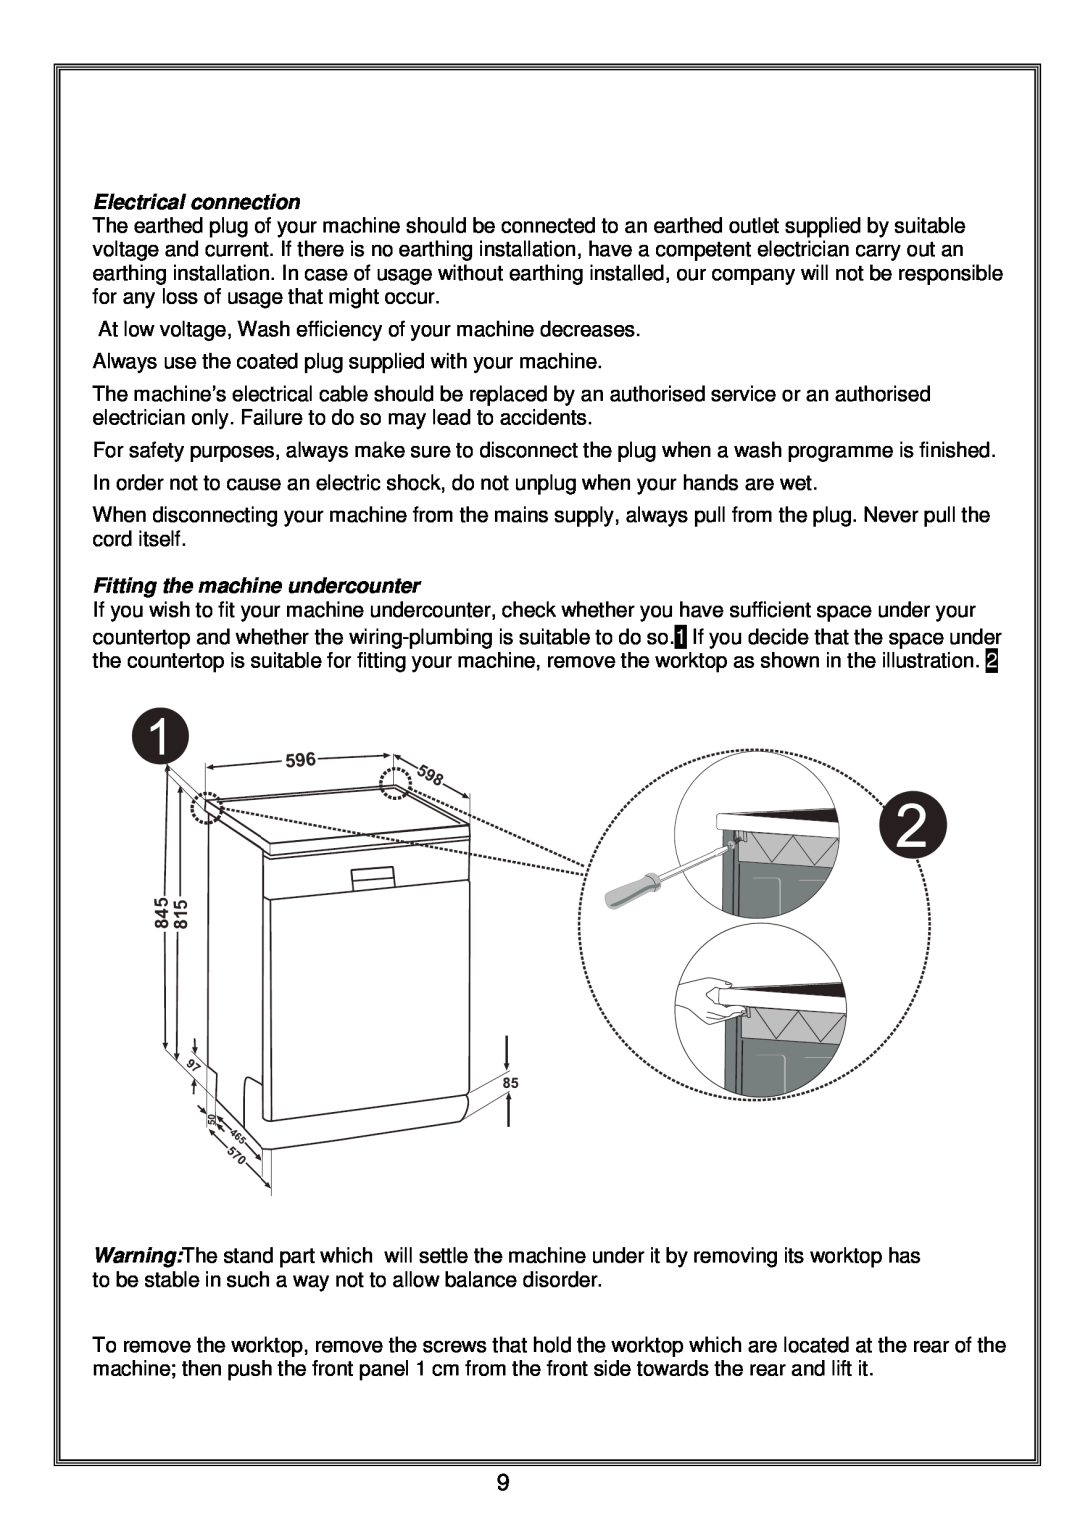 Russell Hobbs RHDW1 instruction manual Electrical connection, Fitting the machine undercounter 